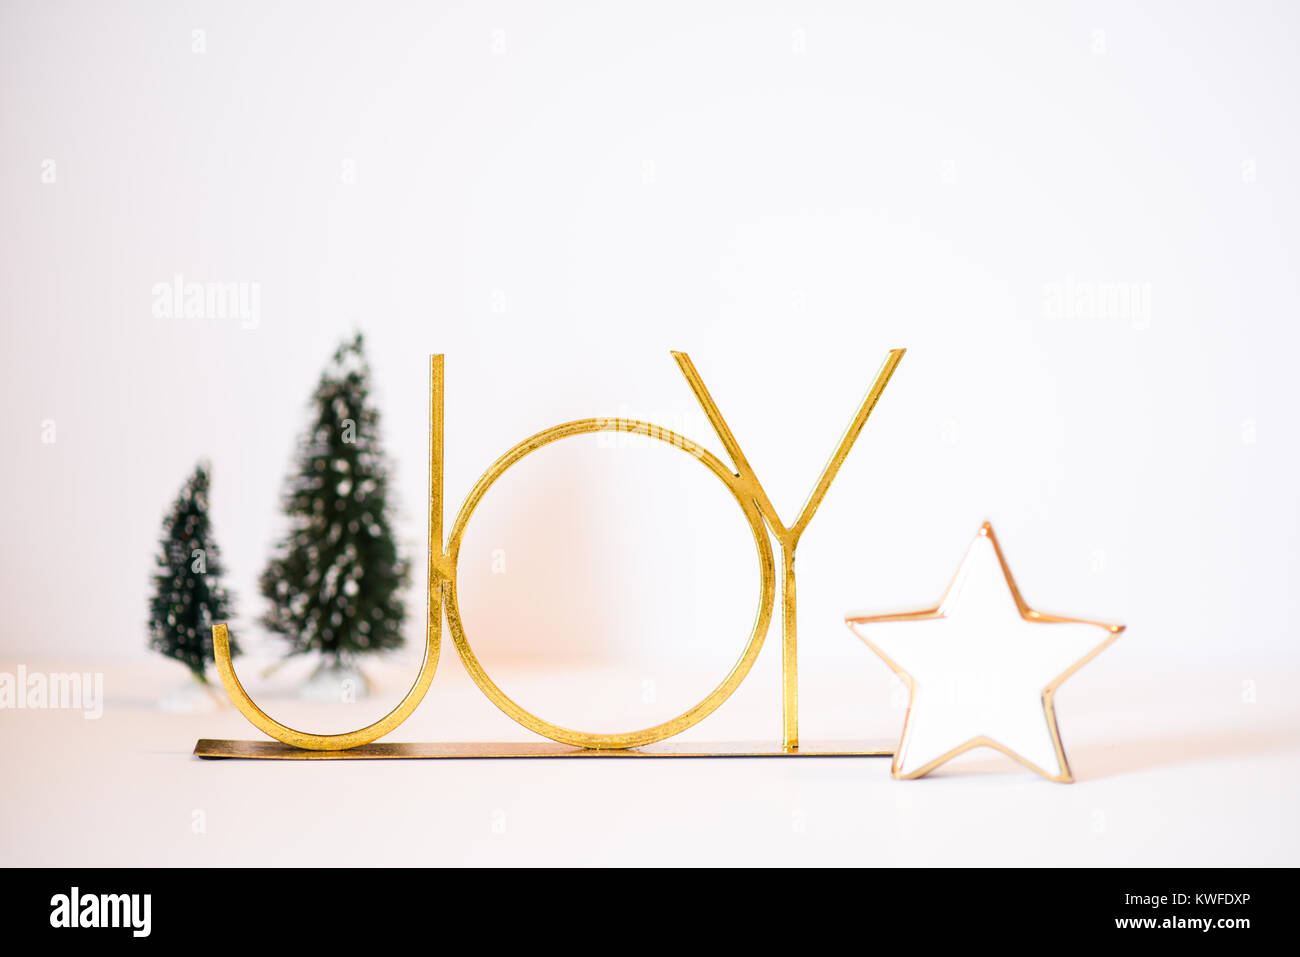 Christmas Scene featuring a gold JOY, cream star, and Christmas trees Stock Photo